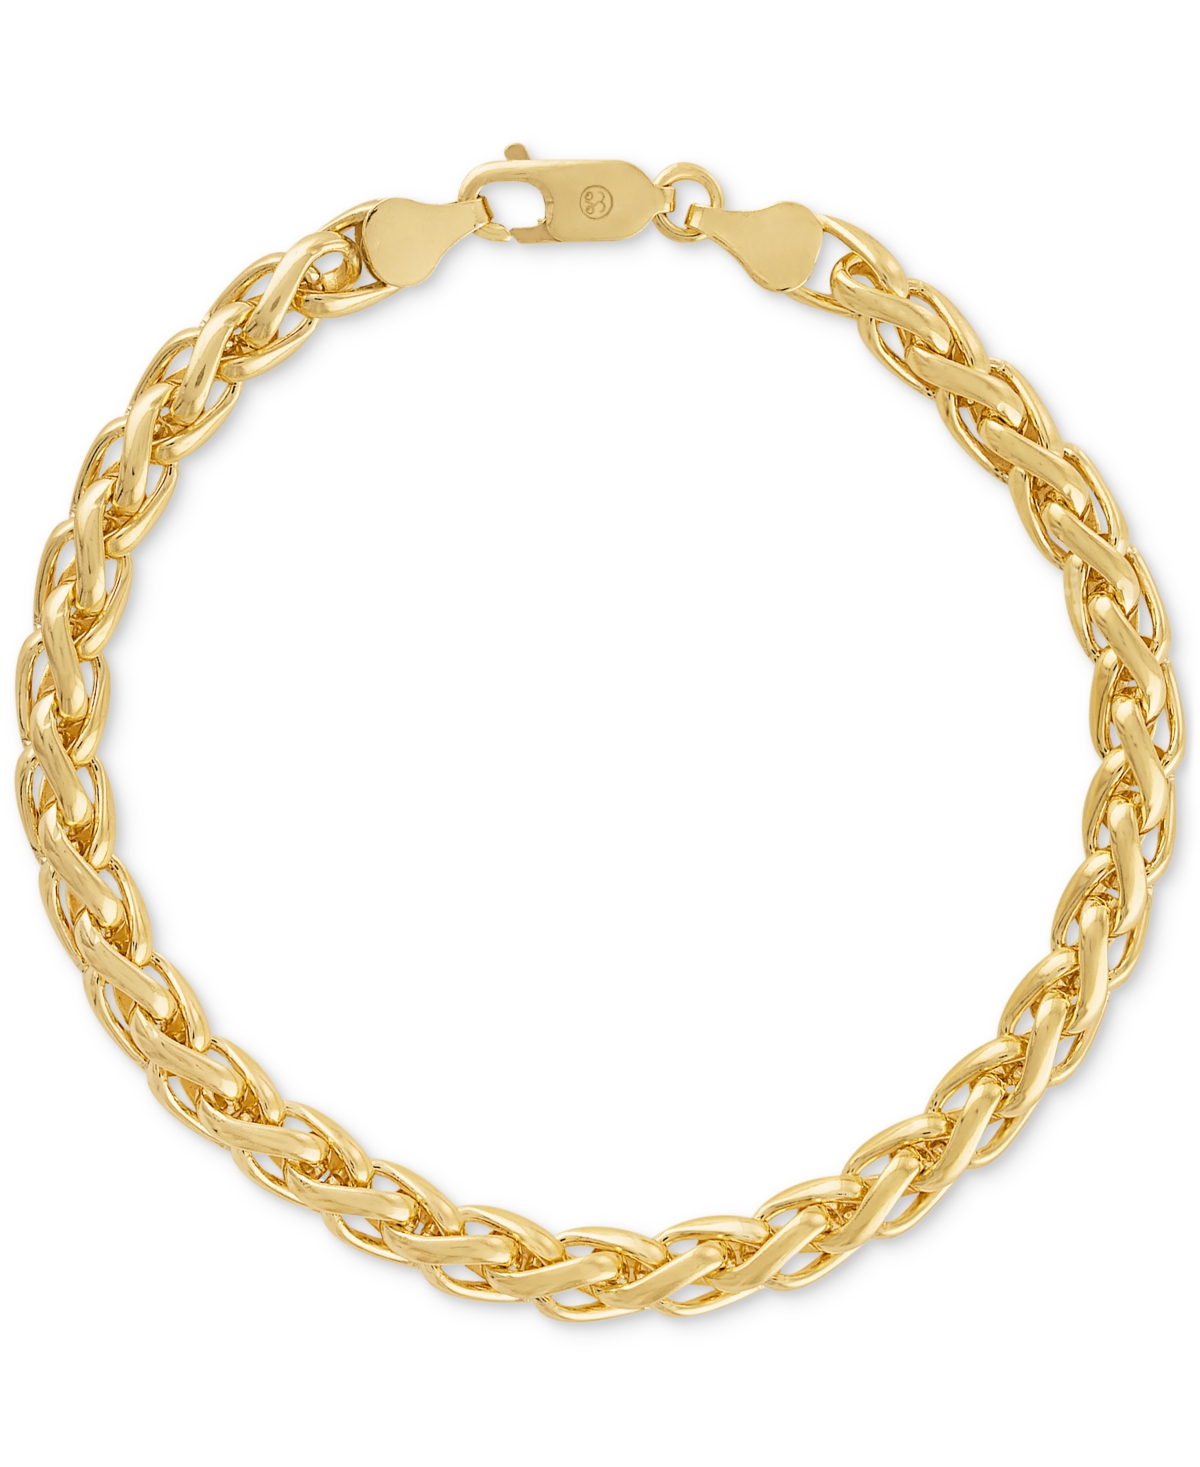 Wheat Link Chain Bracelet, Created for Macy's - Gold